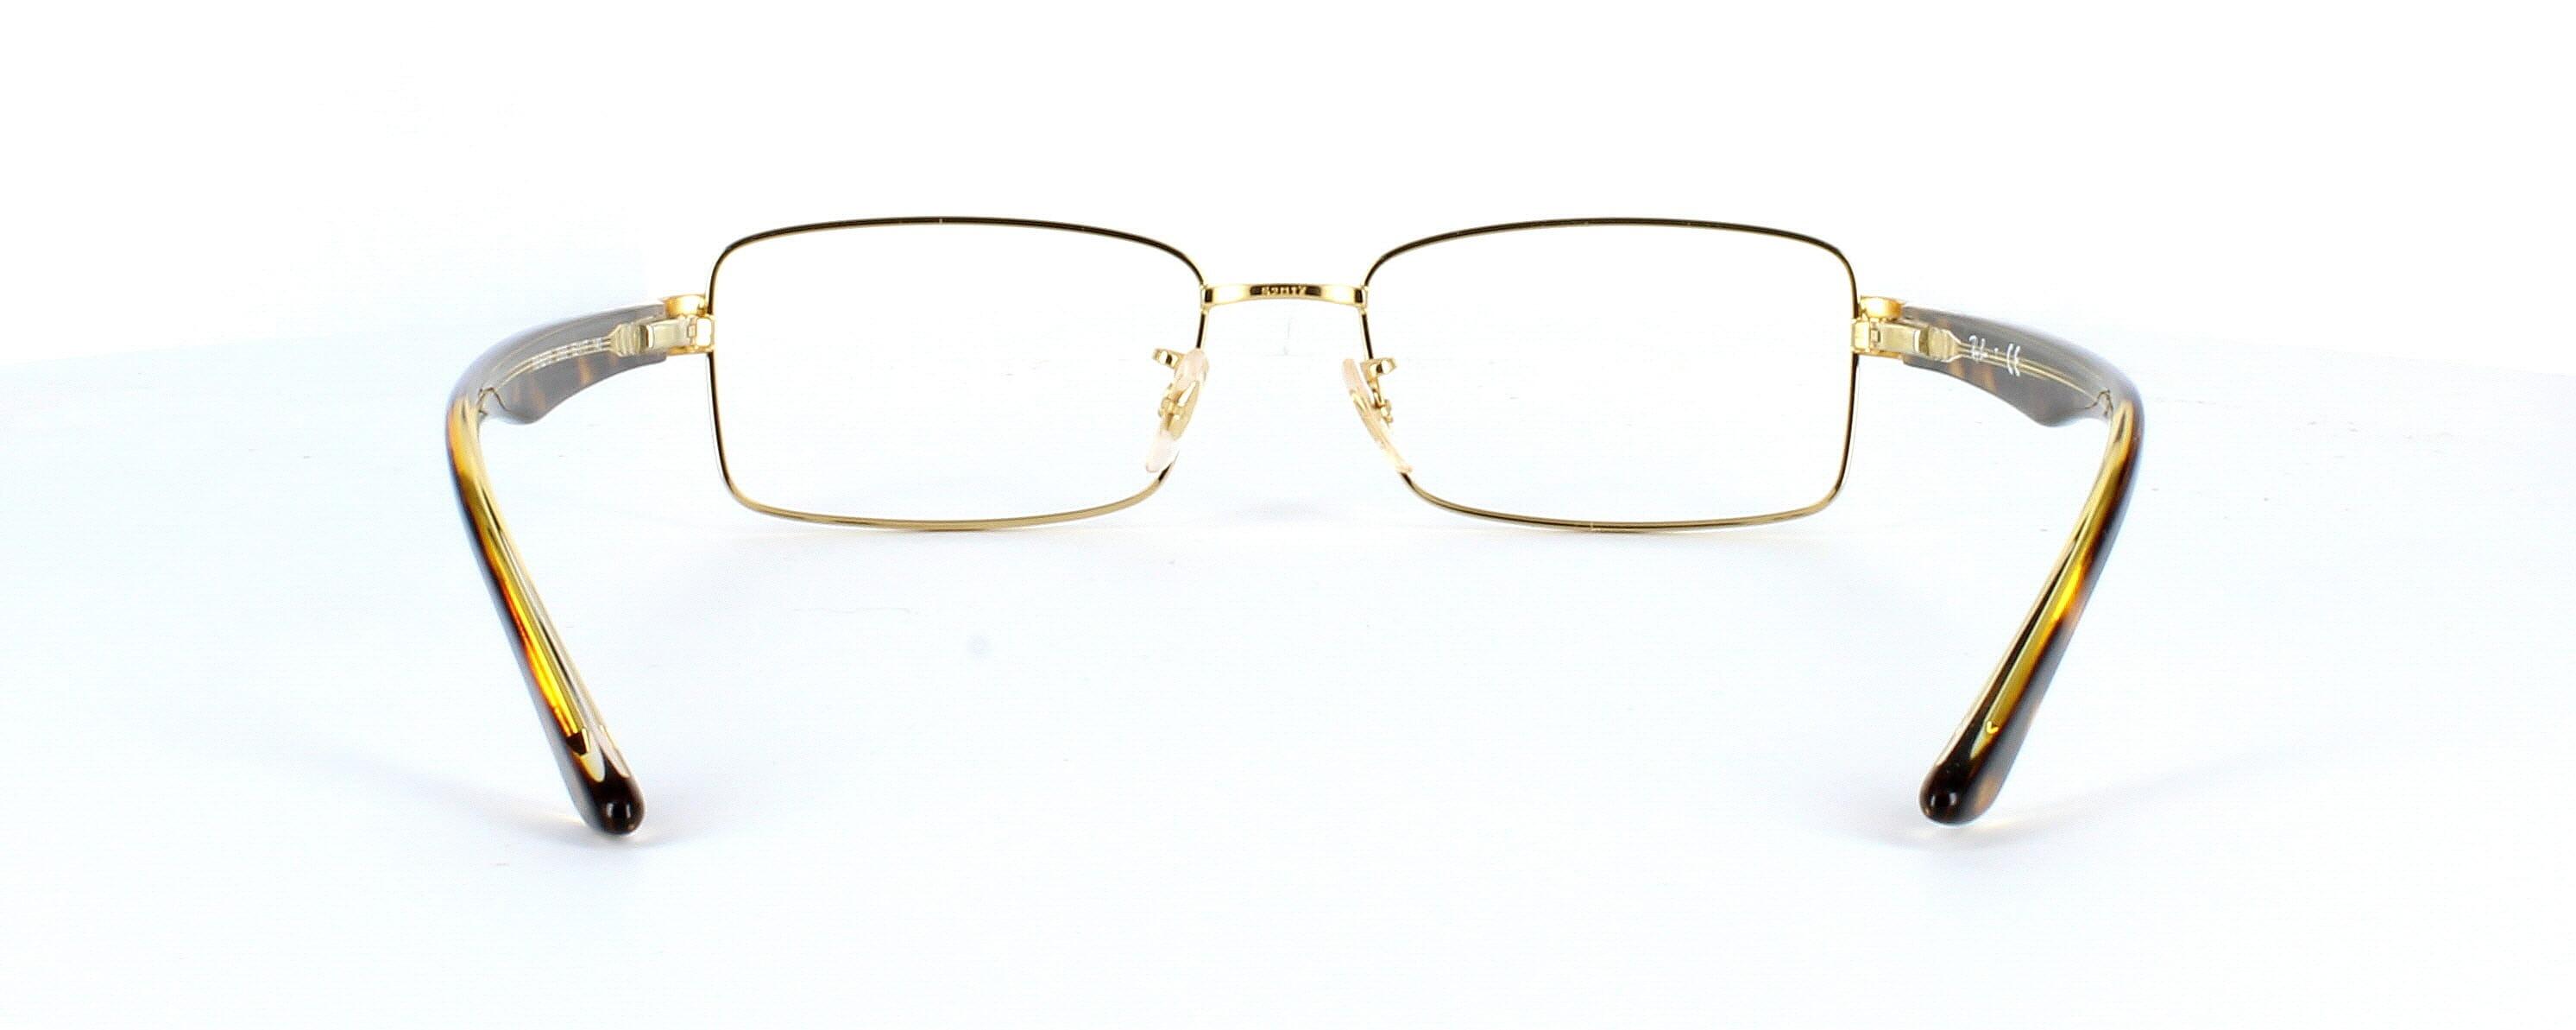 Ray Ban 62701 Gold - Gent's narrow full metal rectangular shaped glasses in gold - image view 4